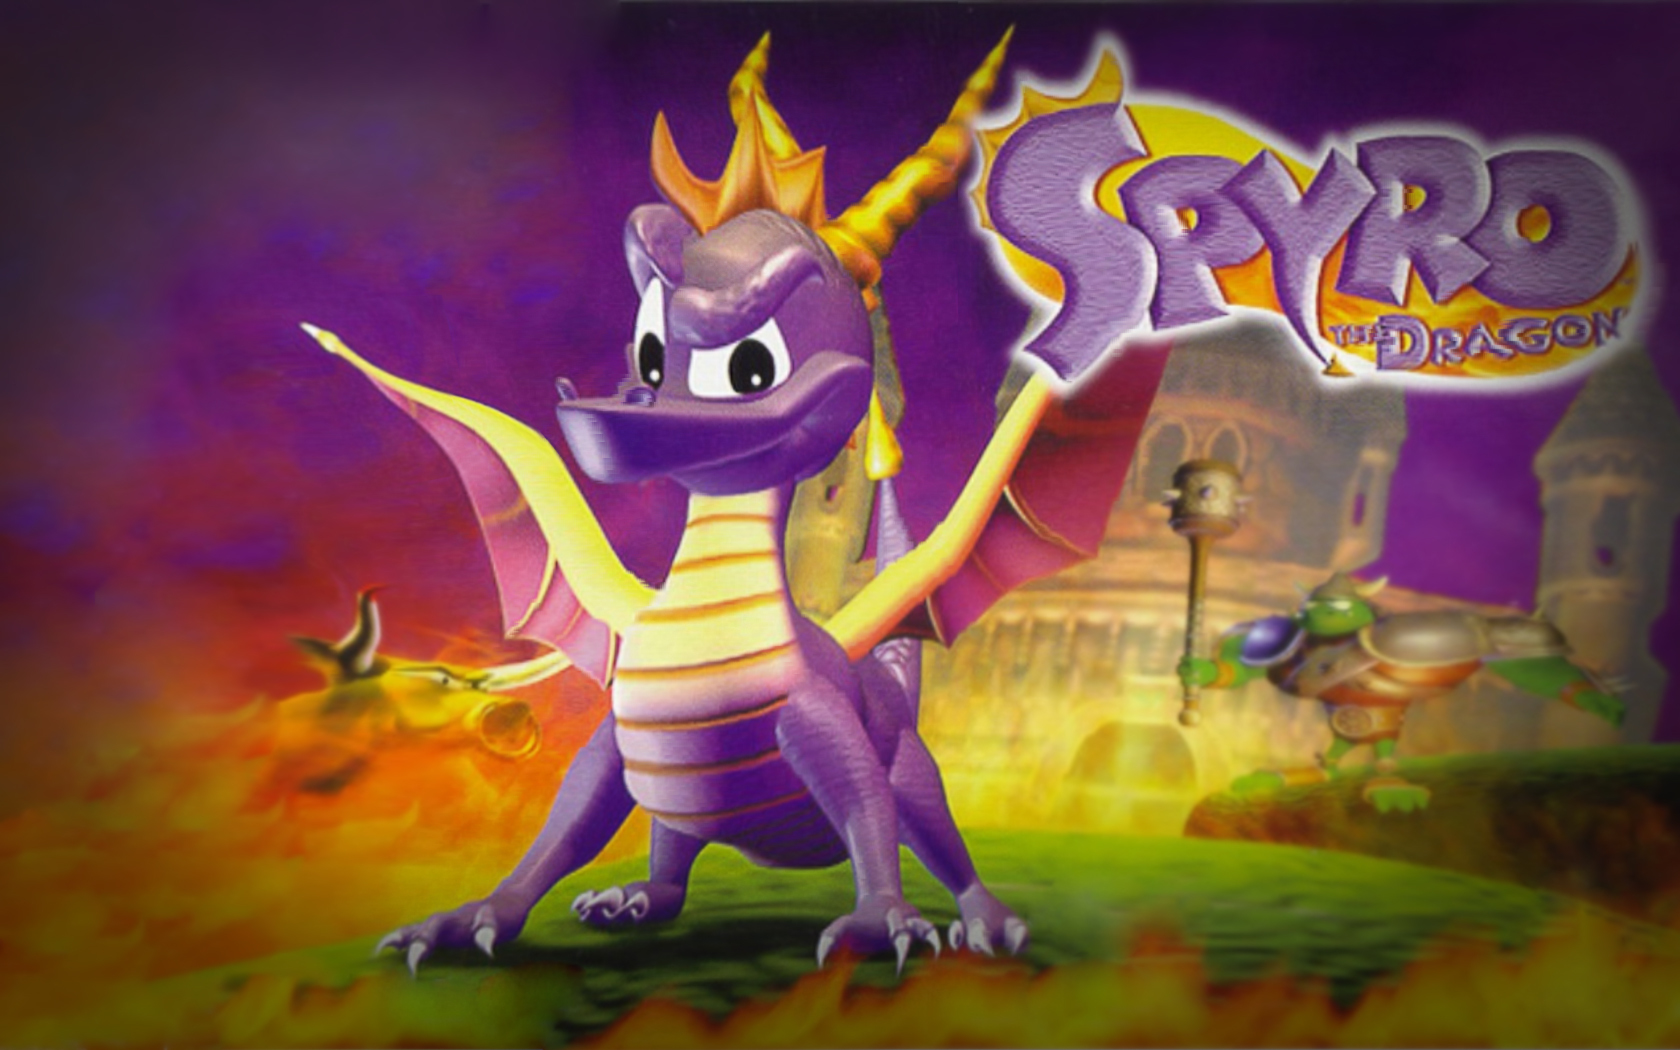 Spyro the Dragon' trilogy remaster reportedly coming to PS4 this year – BGR